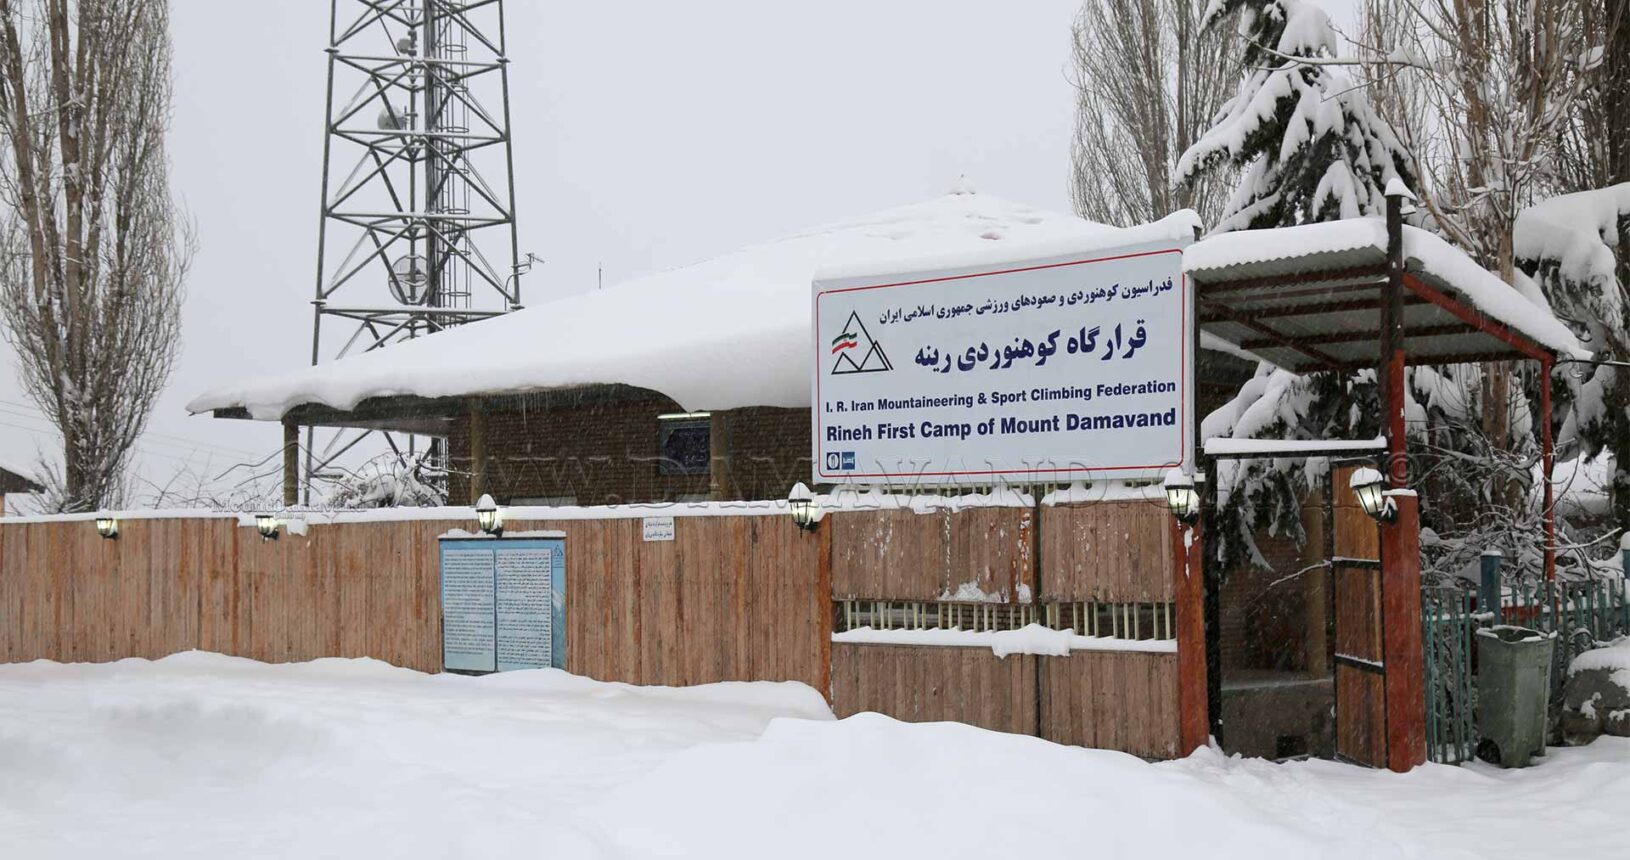 The entrance to Damavand Camp 1 from street under snowy conditions